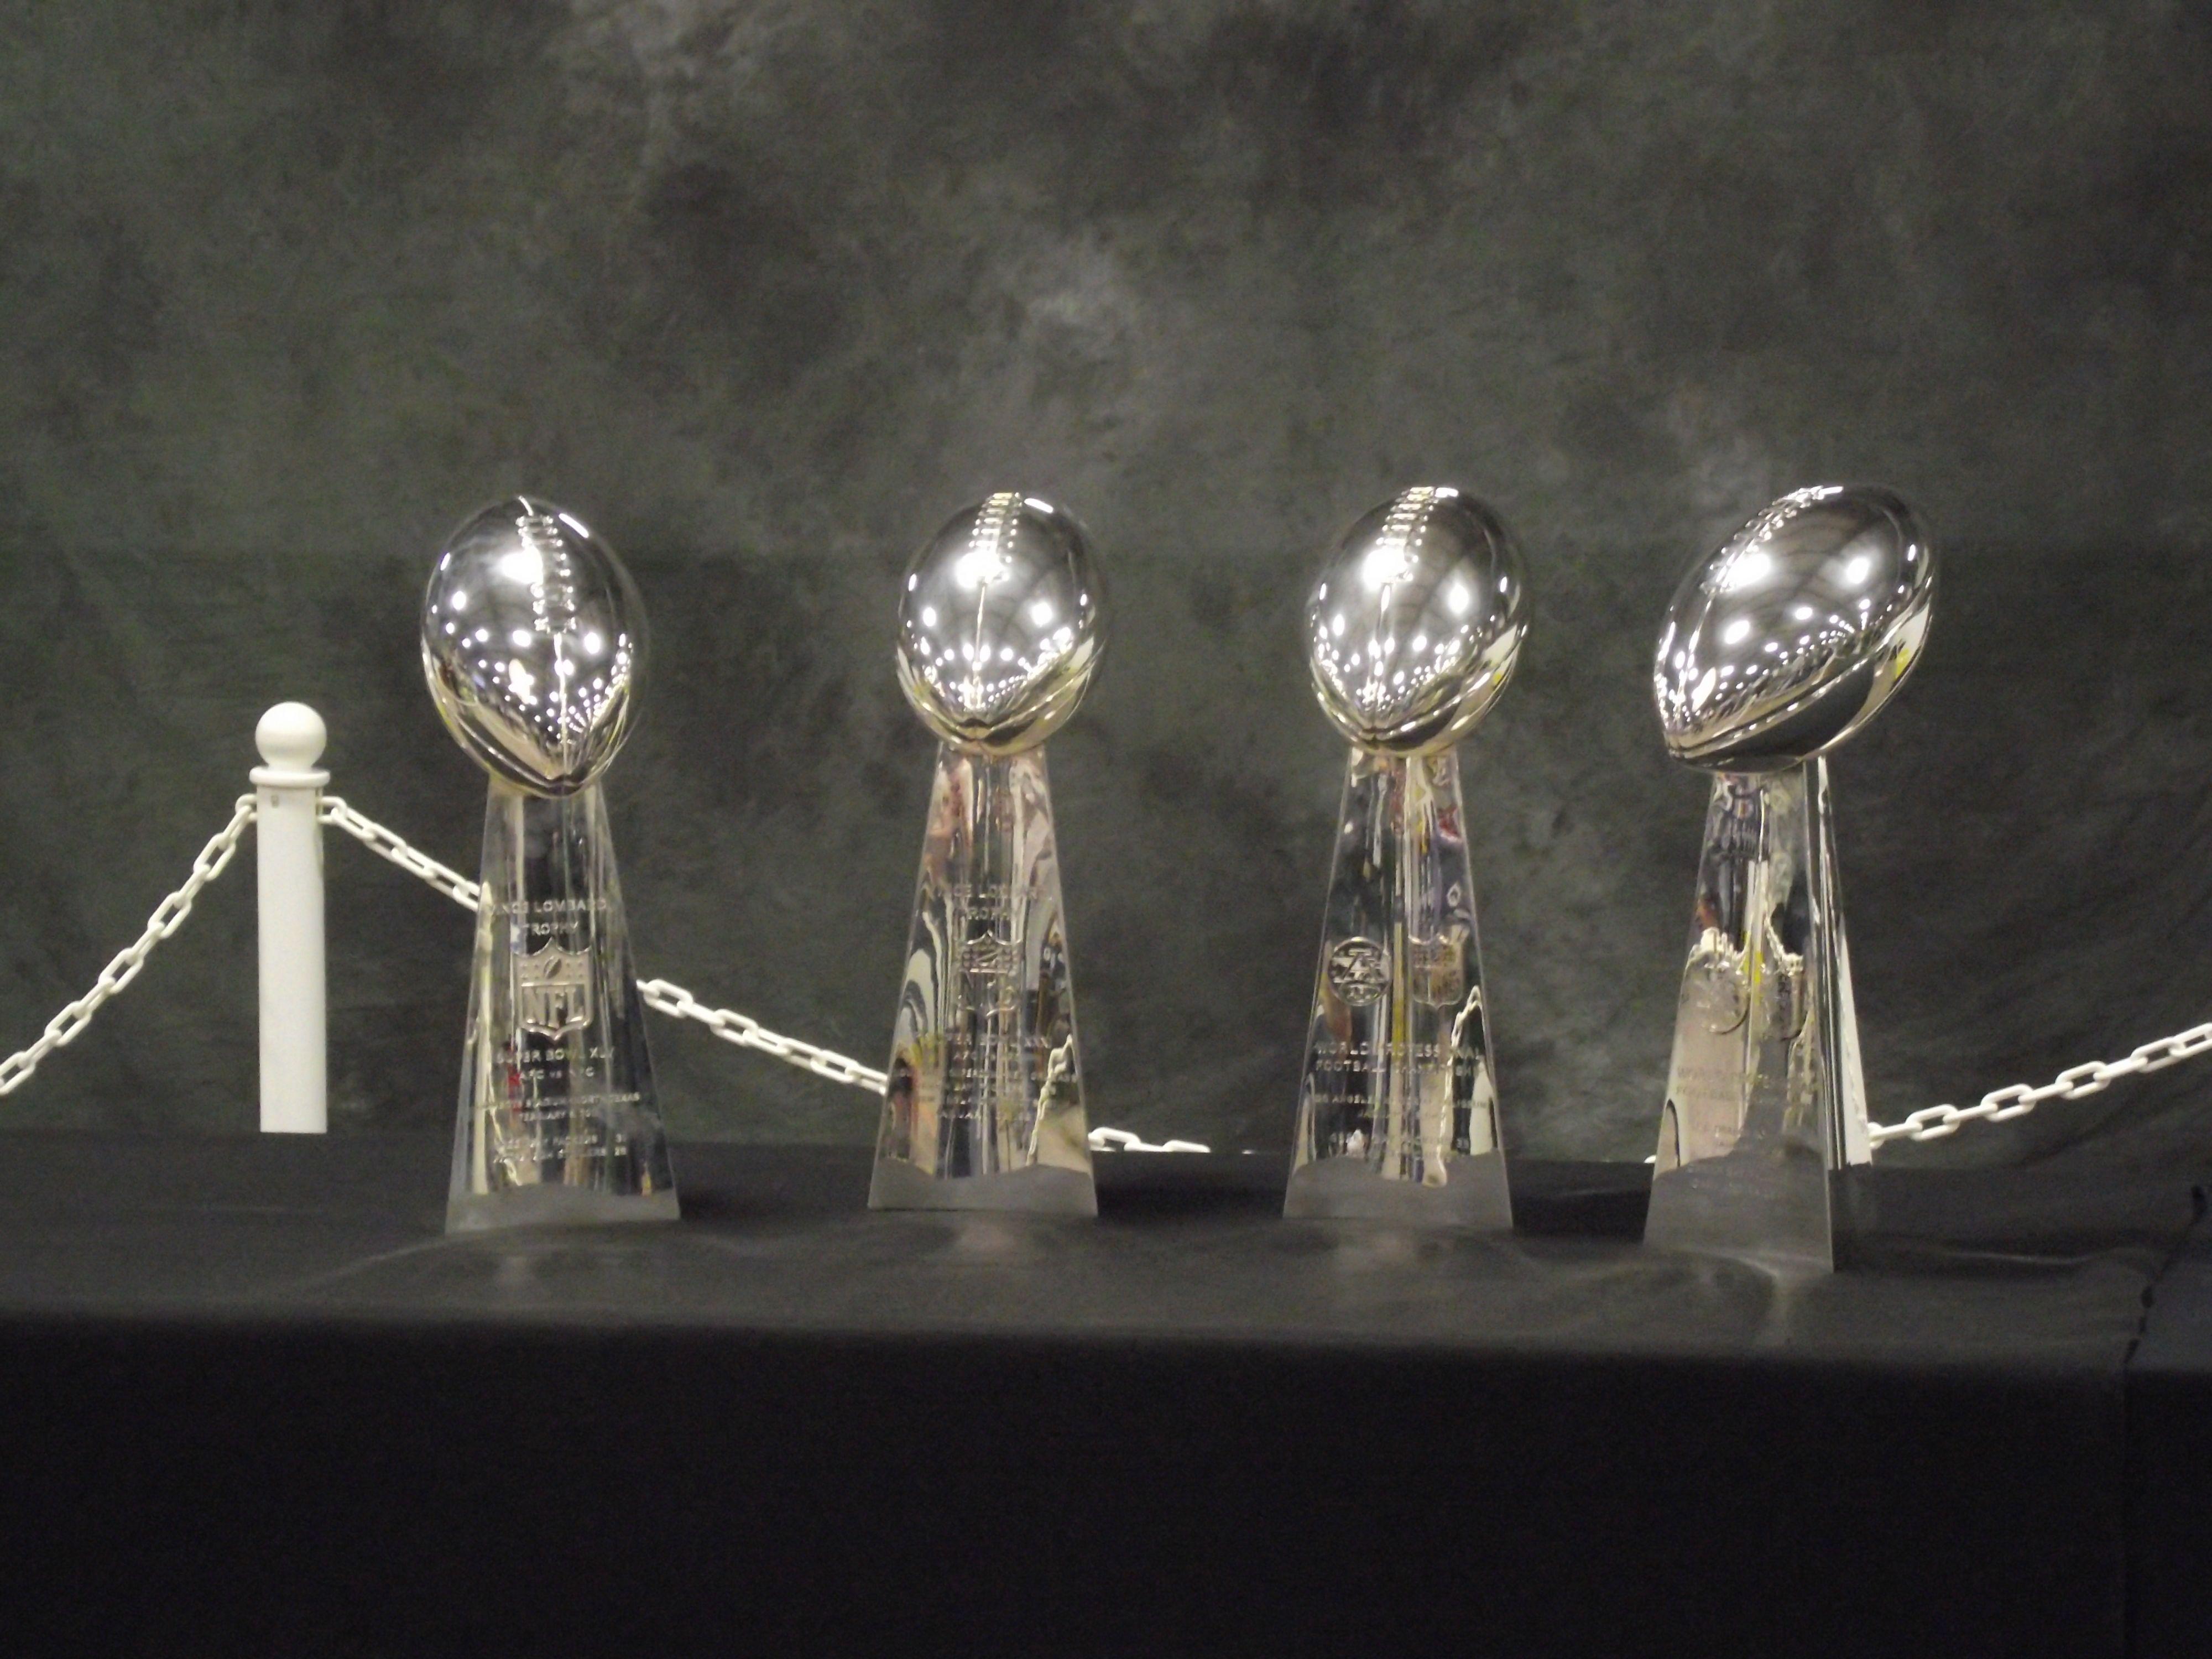 The Green Bay Packers Four Super Bowl Trophies. Green Bay Packers